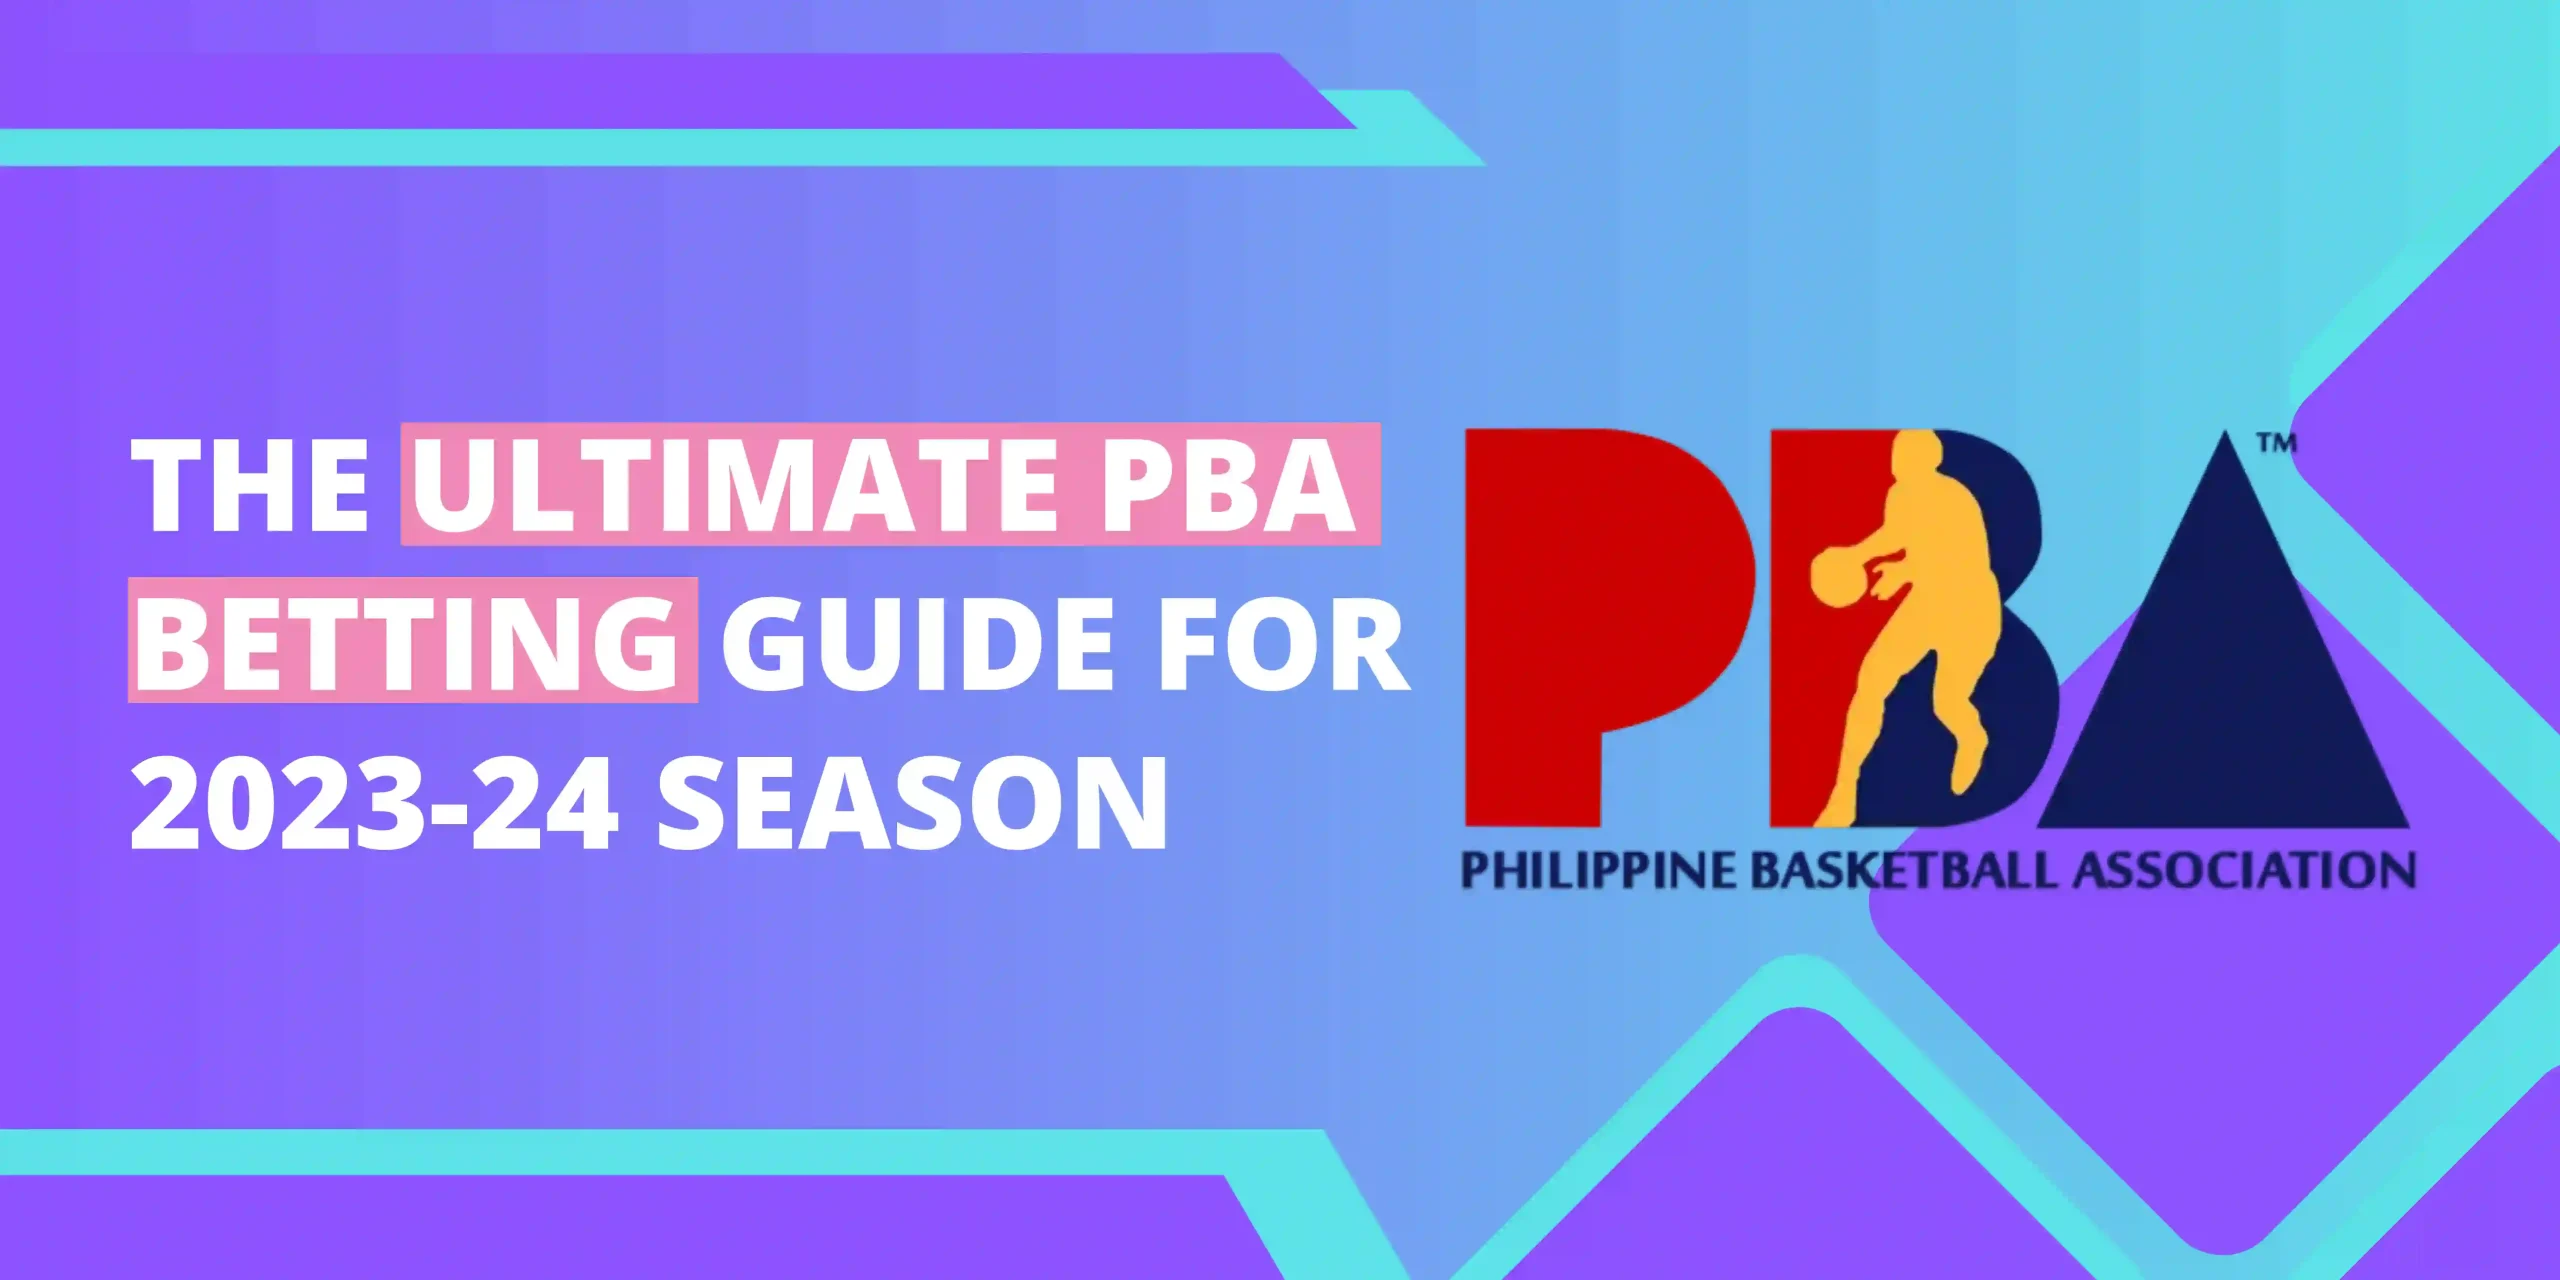 The Ultimate PBA Betting Guide for 2023-24 Season